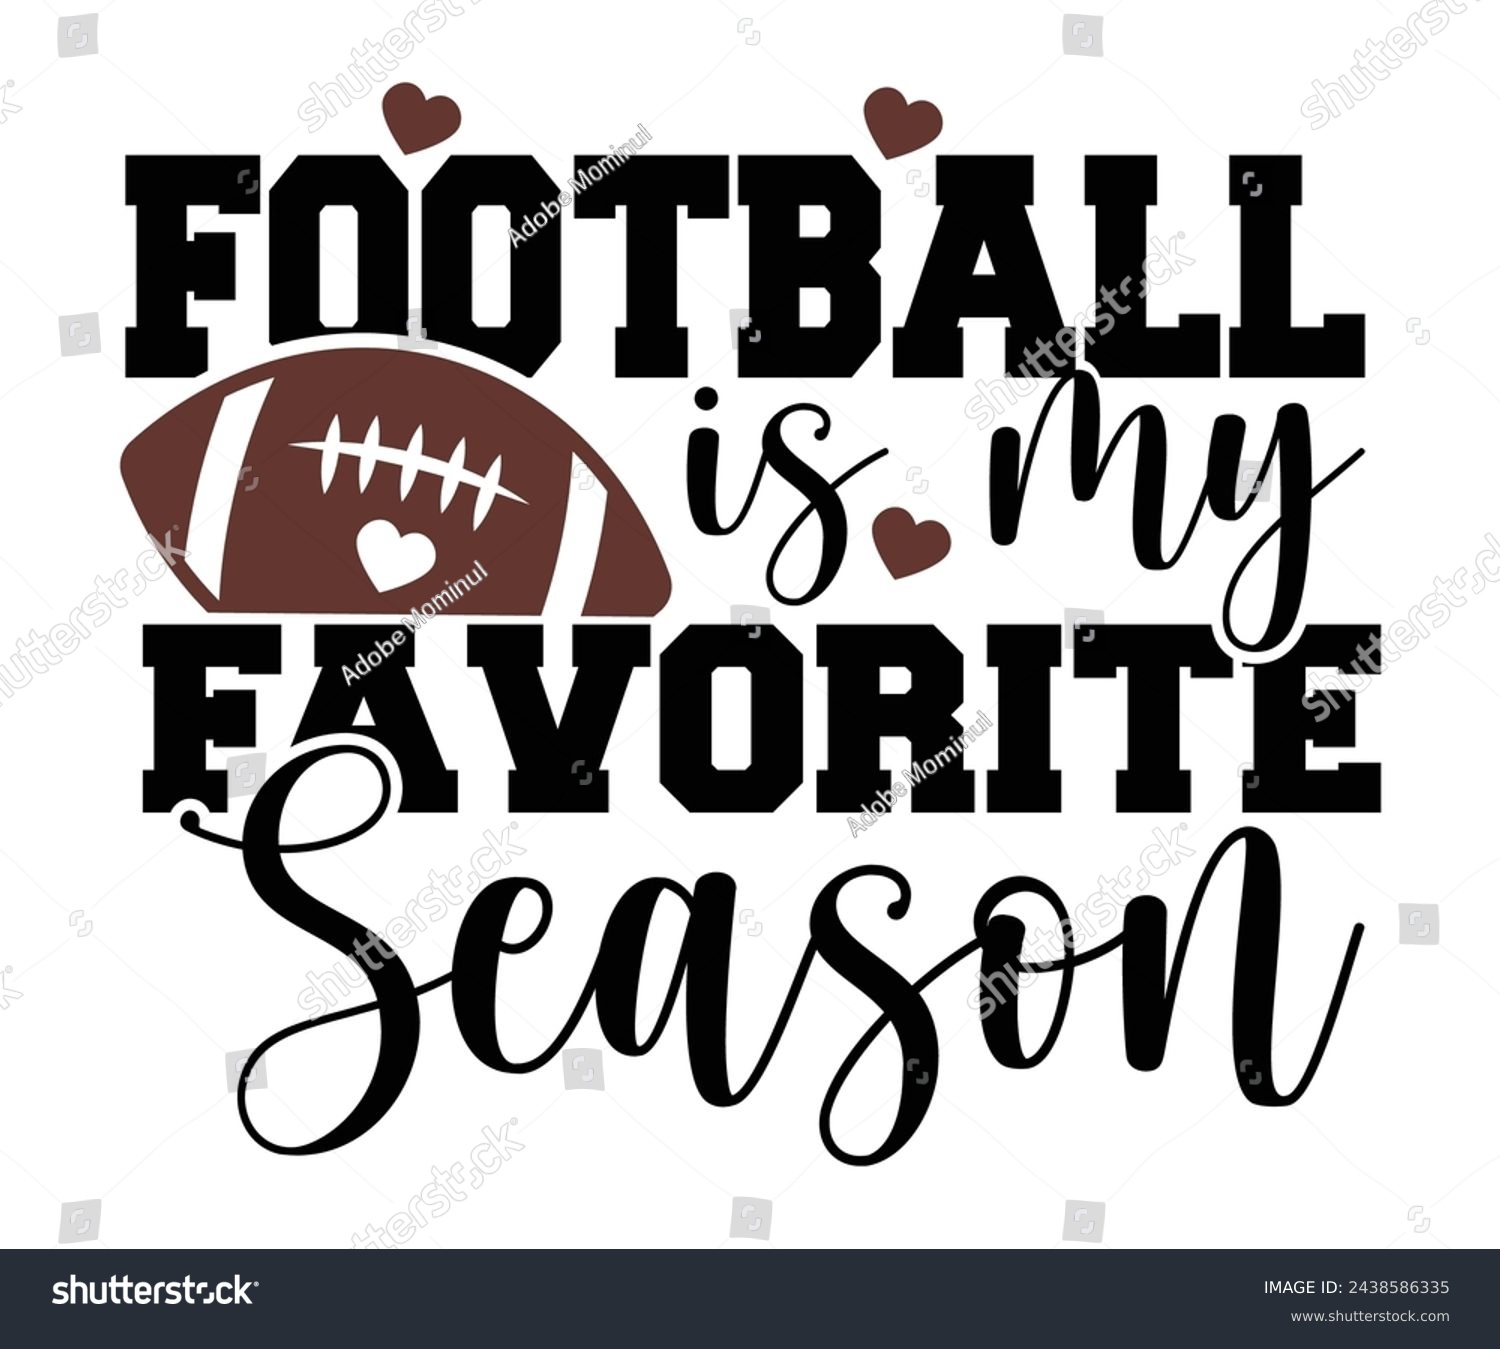 SVG of Football is My Favorite Season,Football Svg,Football Player Svg,Game Day Shirt,Football Quotes Svg,American Football Svg,Soccer Svg,Cut File,Commercial use svg